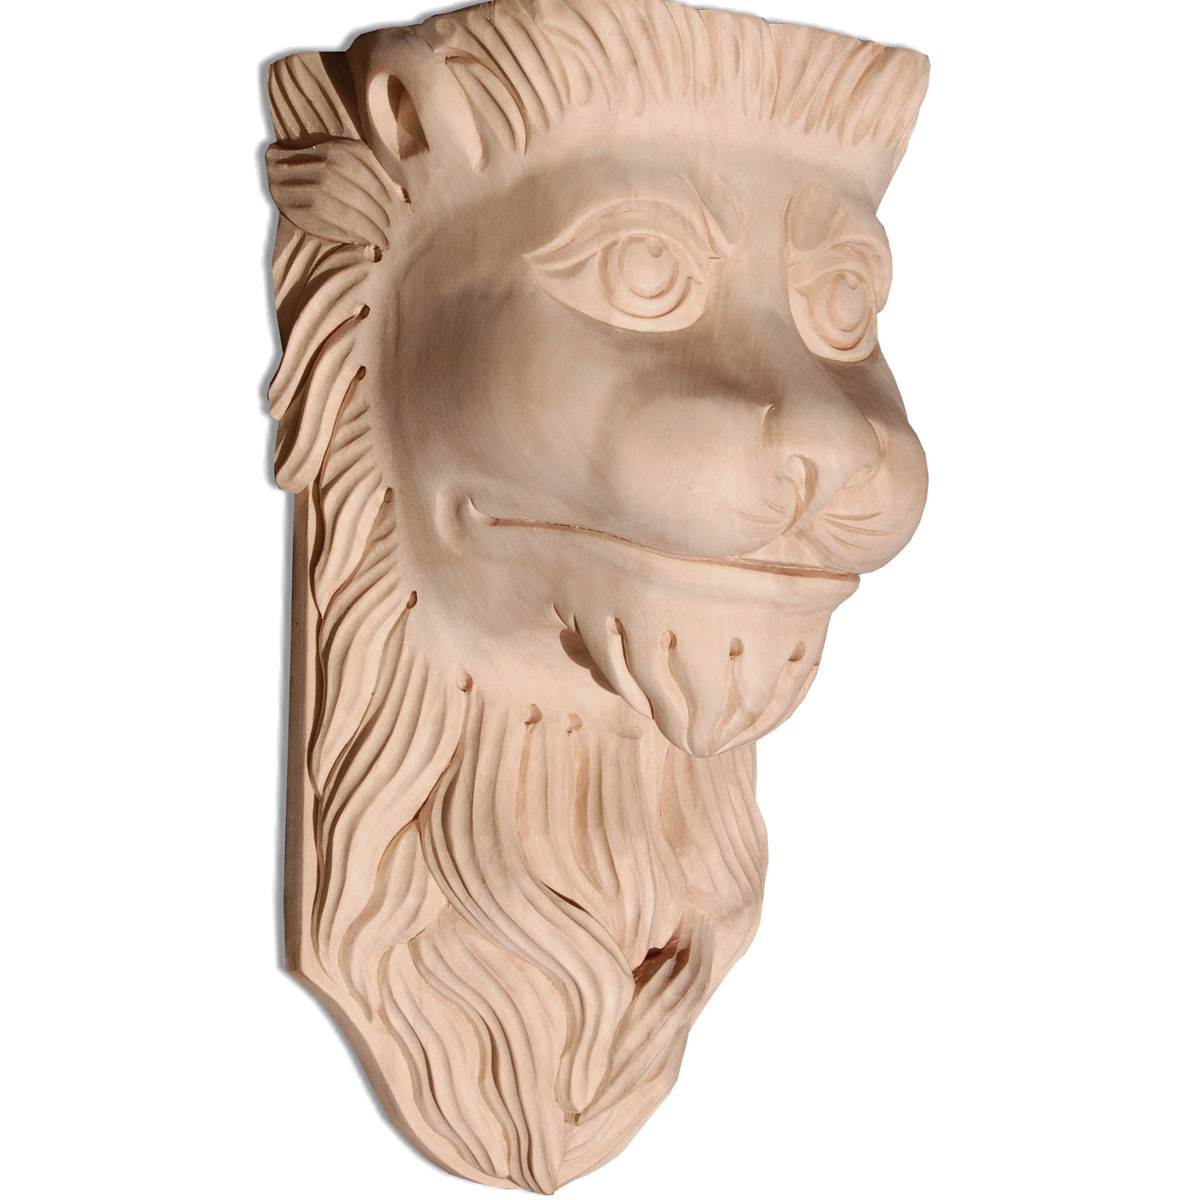 PAIR NARROW LION FACE SCROLL CORBEL BRACKETS ARCHITECTURAL ACCENT WOOD STAINED 